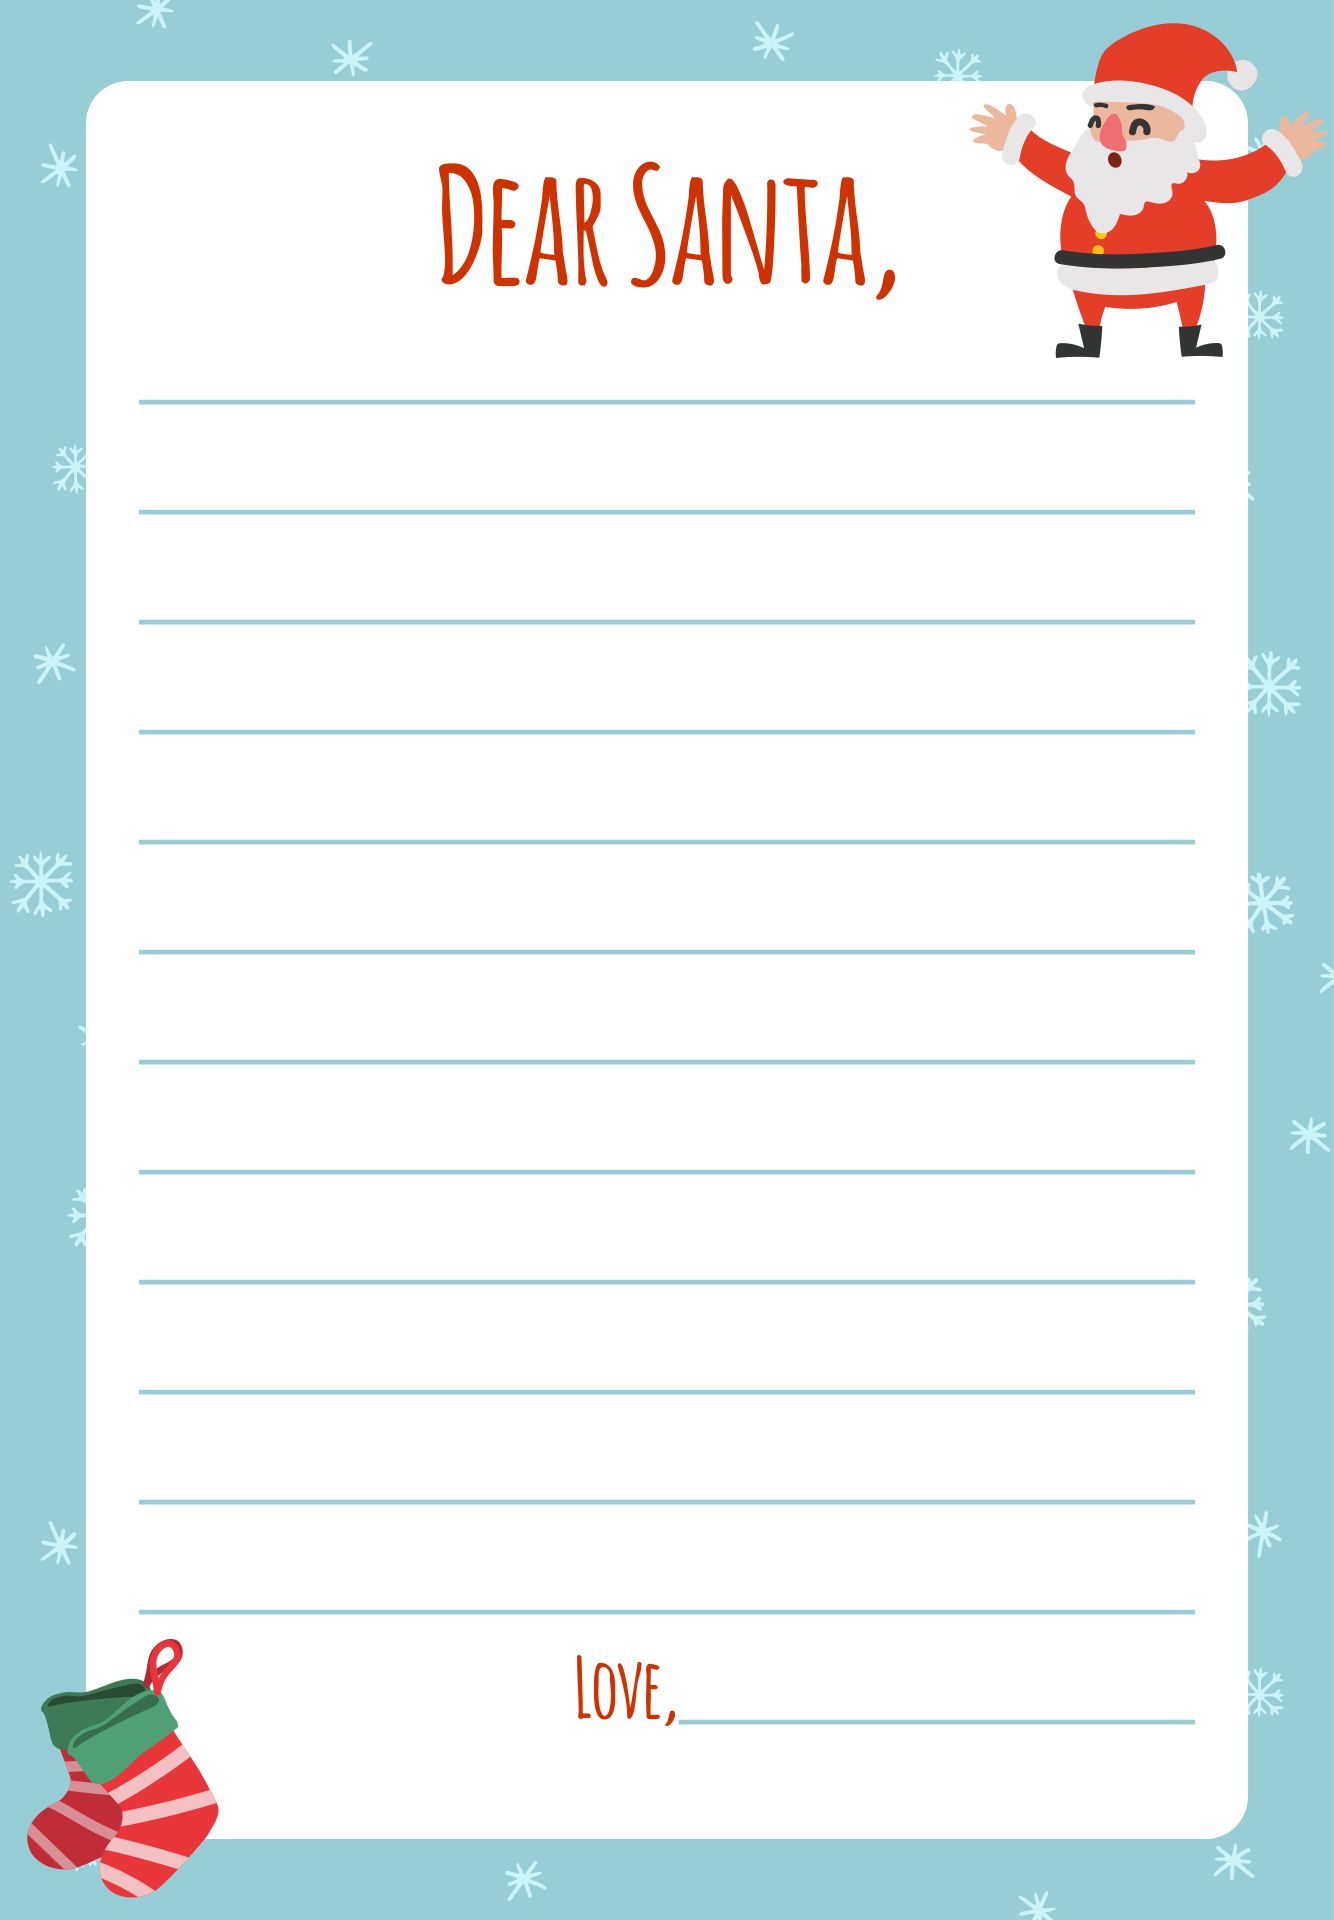 Christmas Letter To Santa Claus Template